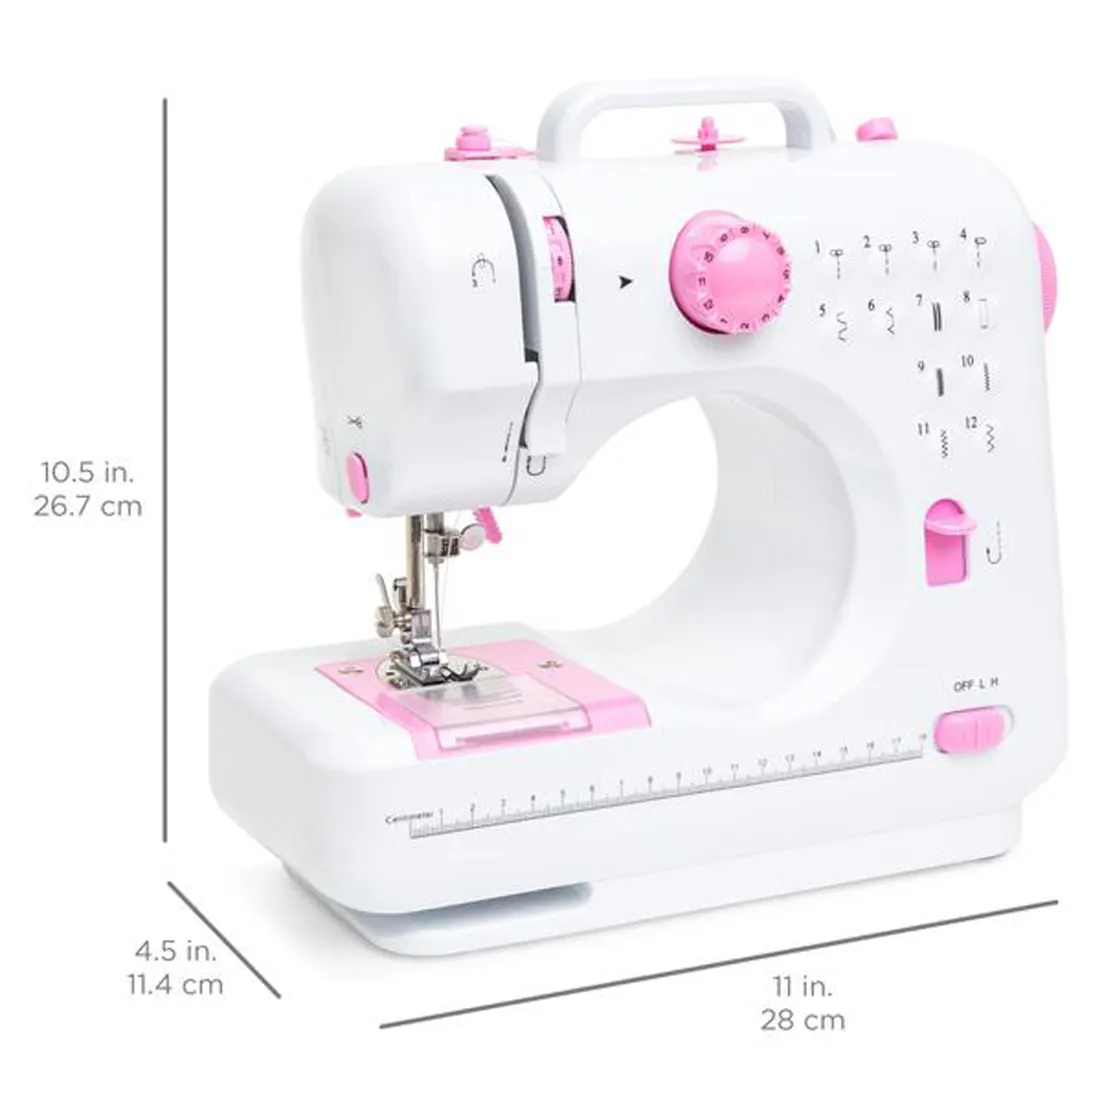 6V Portable Foot Pedal Sewing Machine with 12 Stitch Patterns